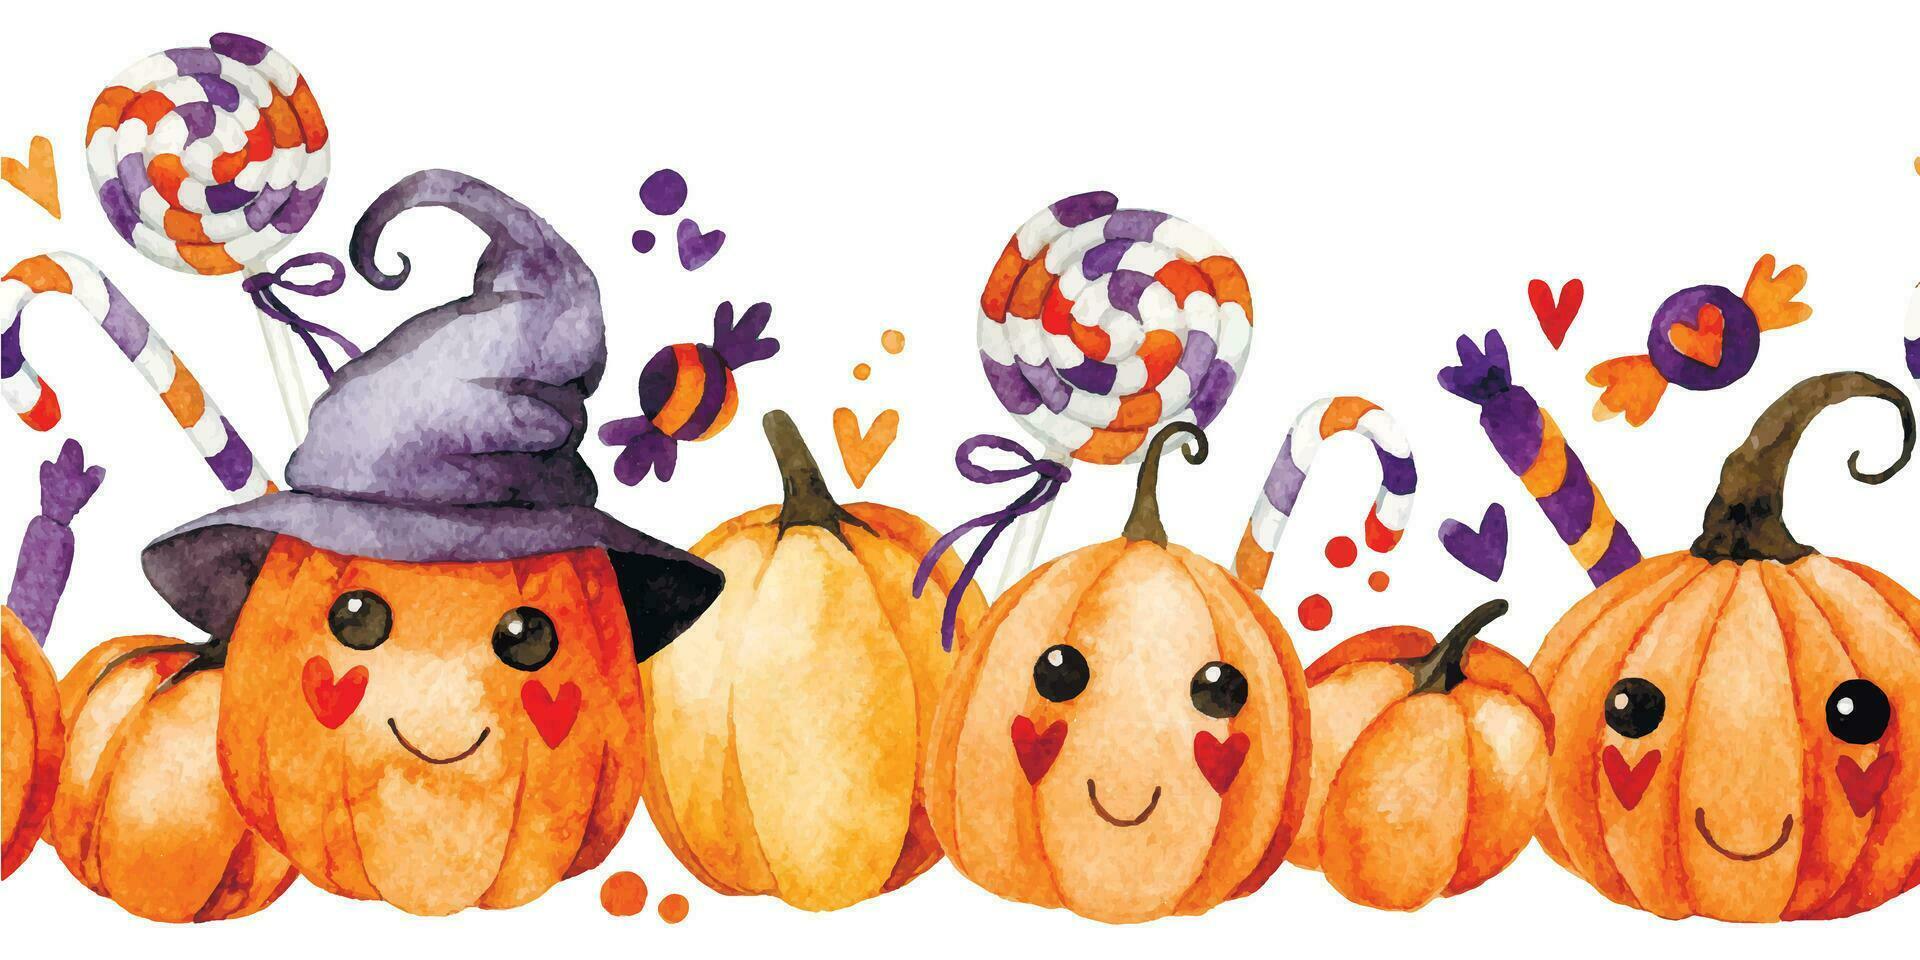 watercolor pattern, seamless border with cute Halloween pumpkins and candies and sweets. kawaii vector